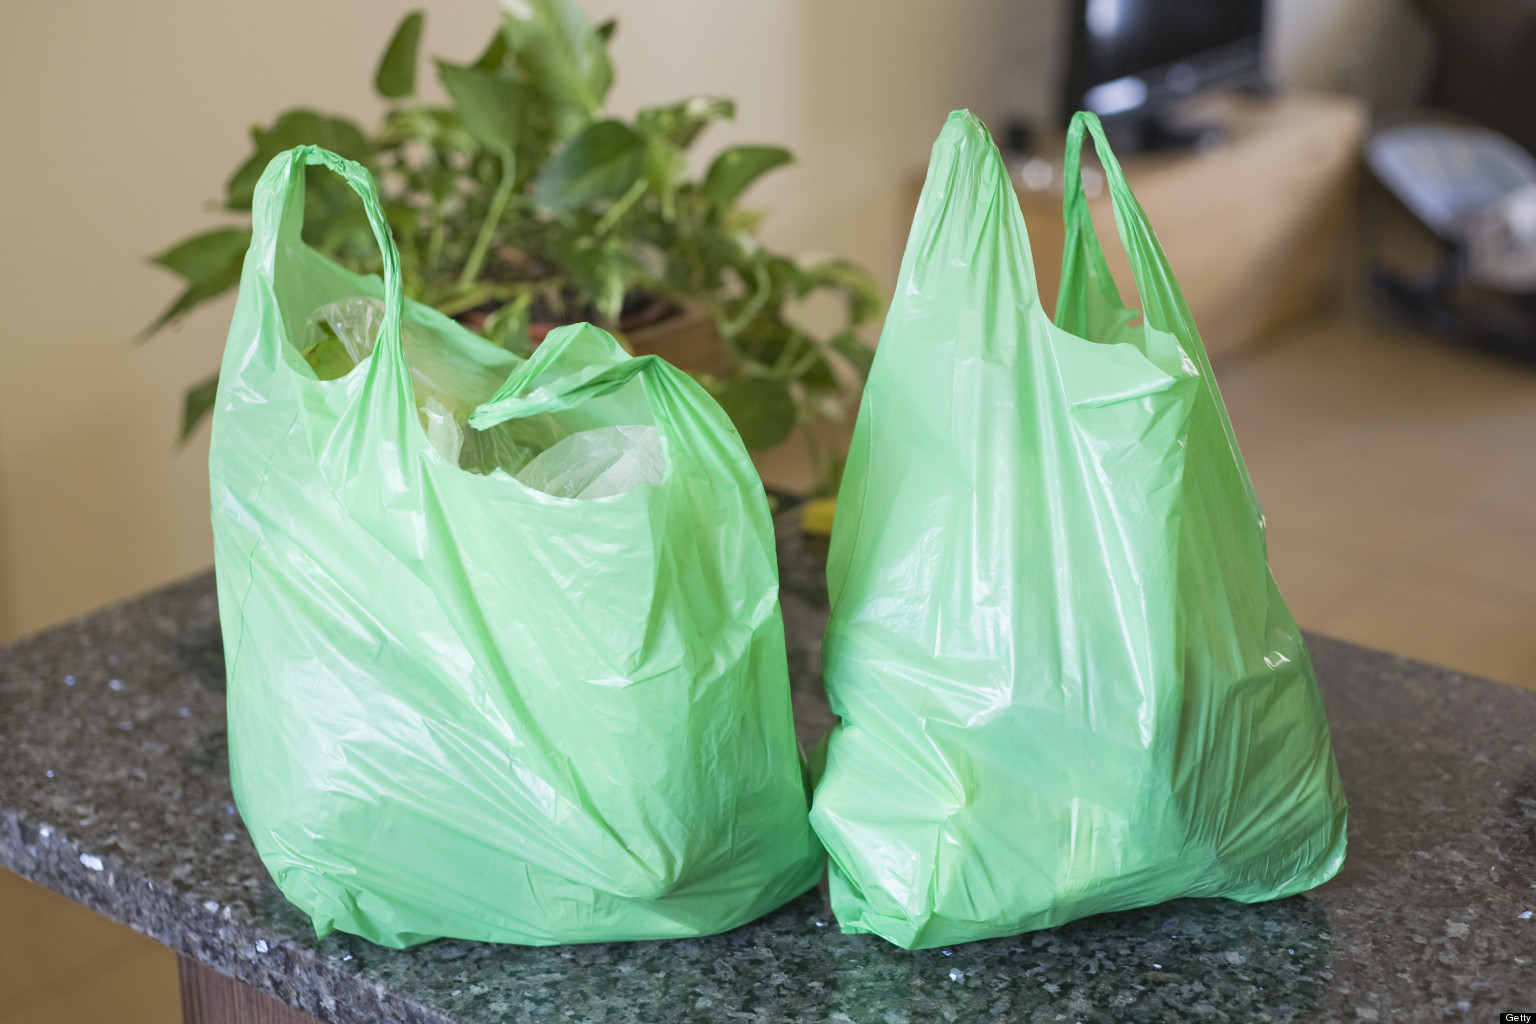 Why You Should Support the Plastic Bag Reduction Ordinance | HuffPost